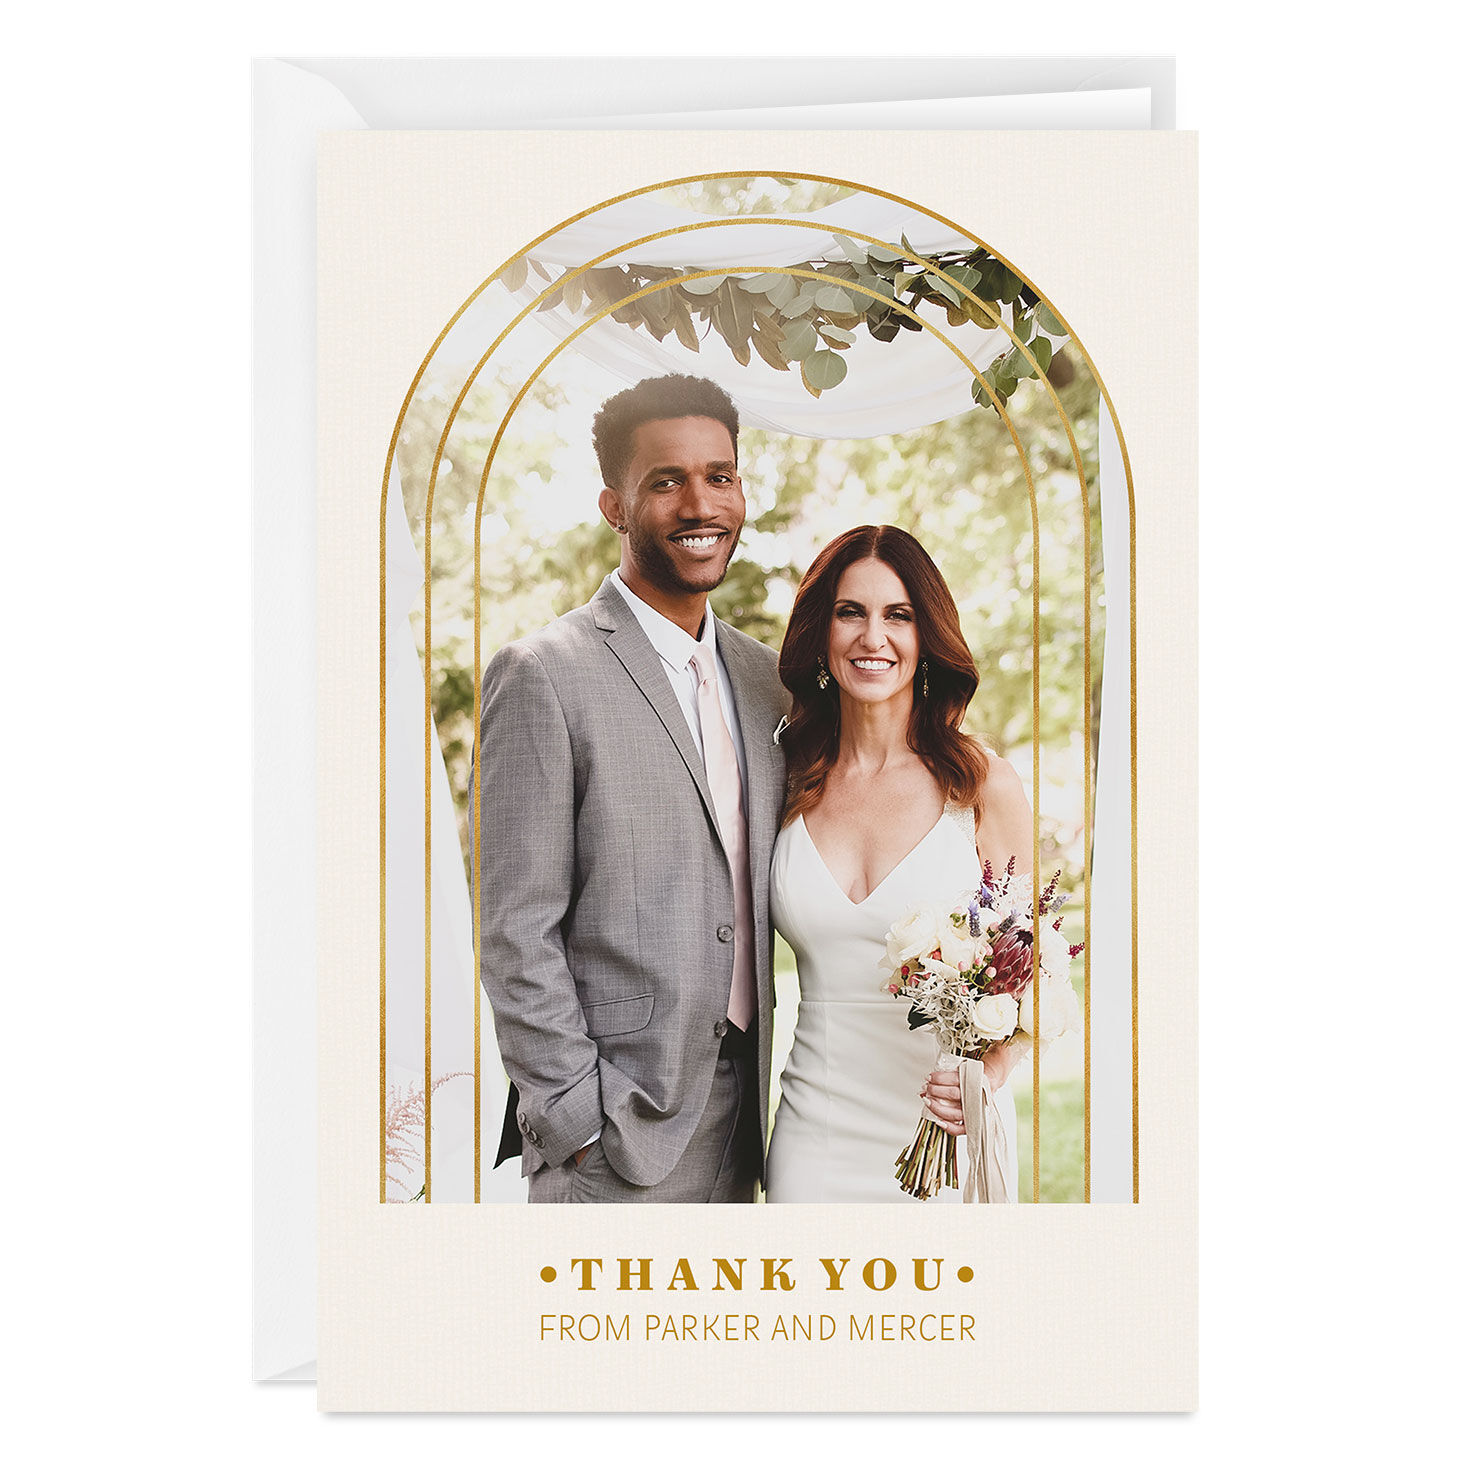 Personalized Elegant Occasion Photo Card for only USD 4.99 | Hallmark